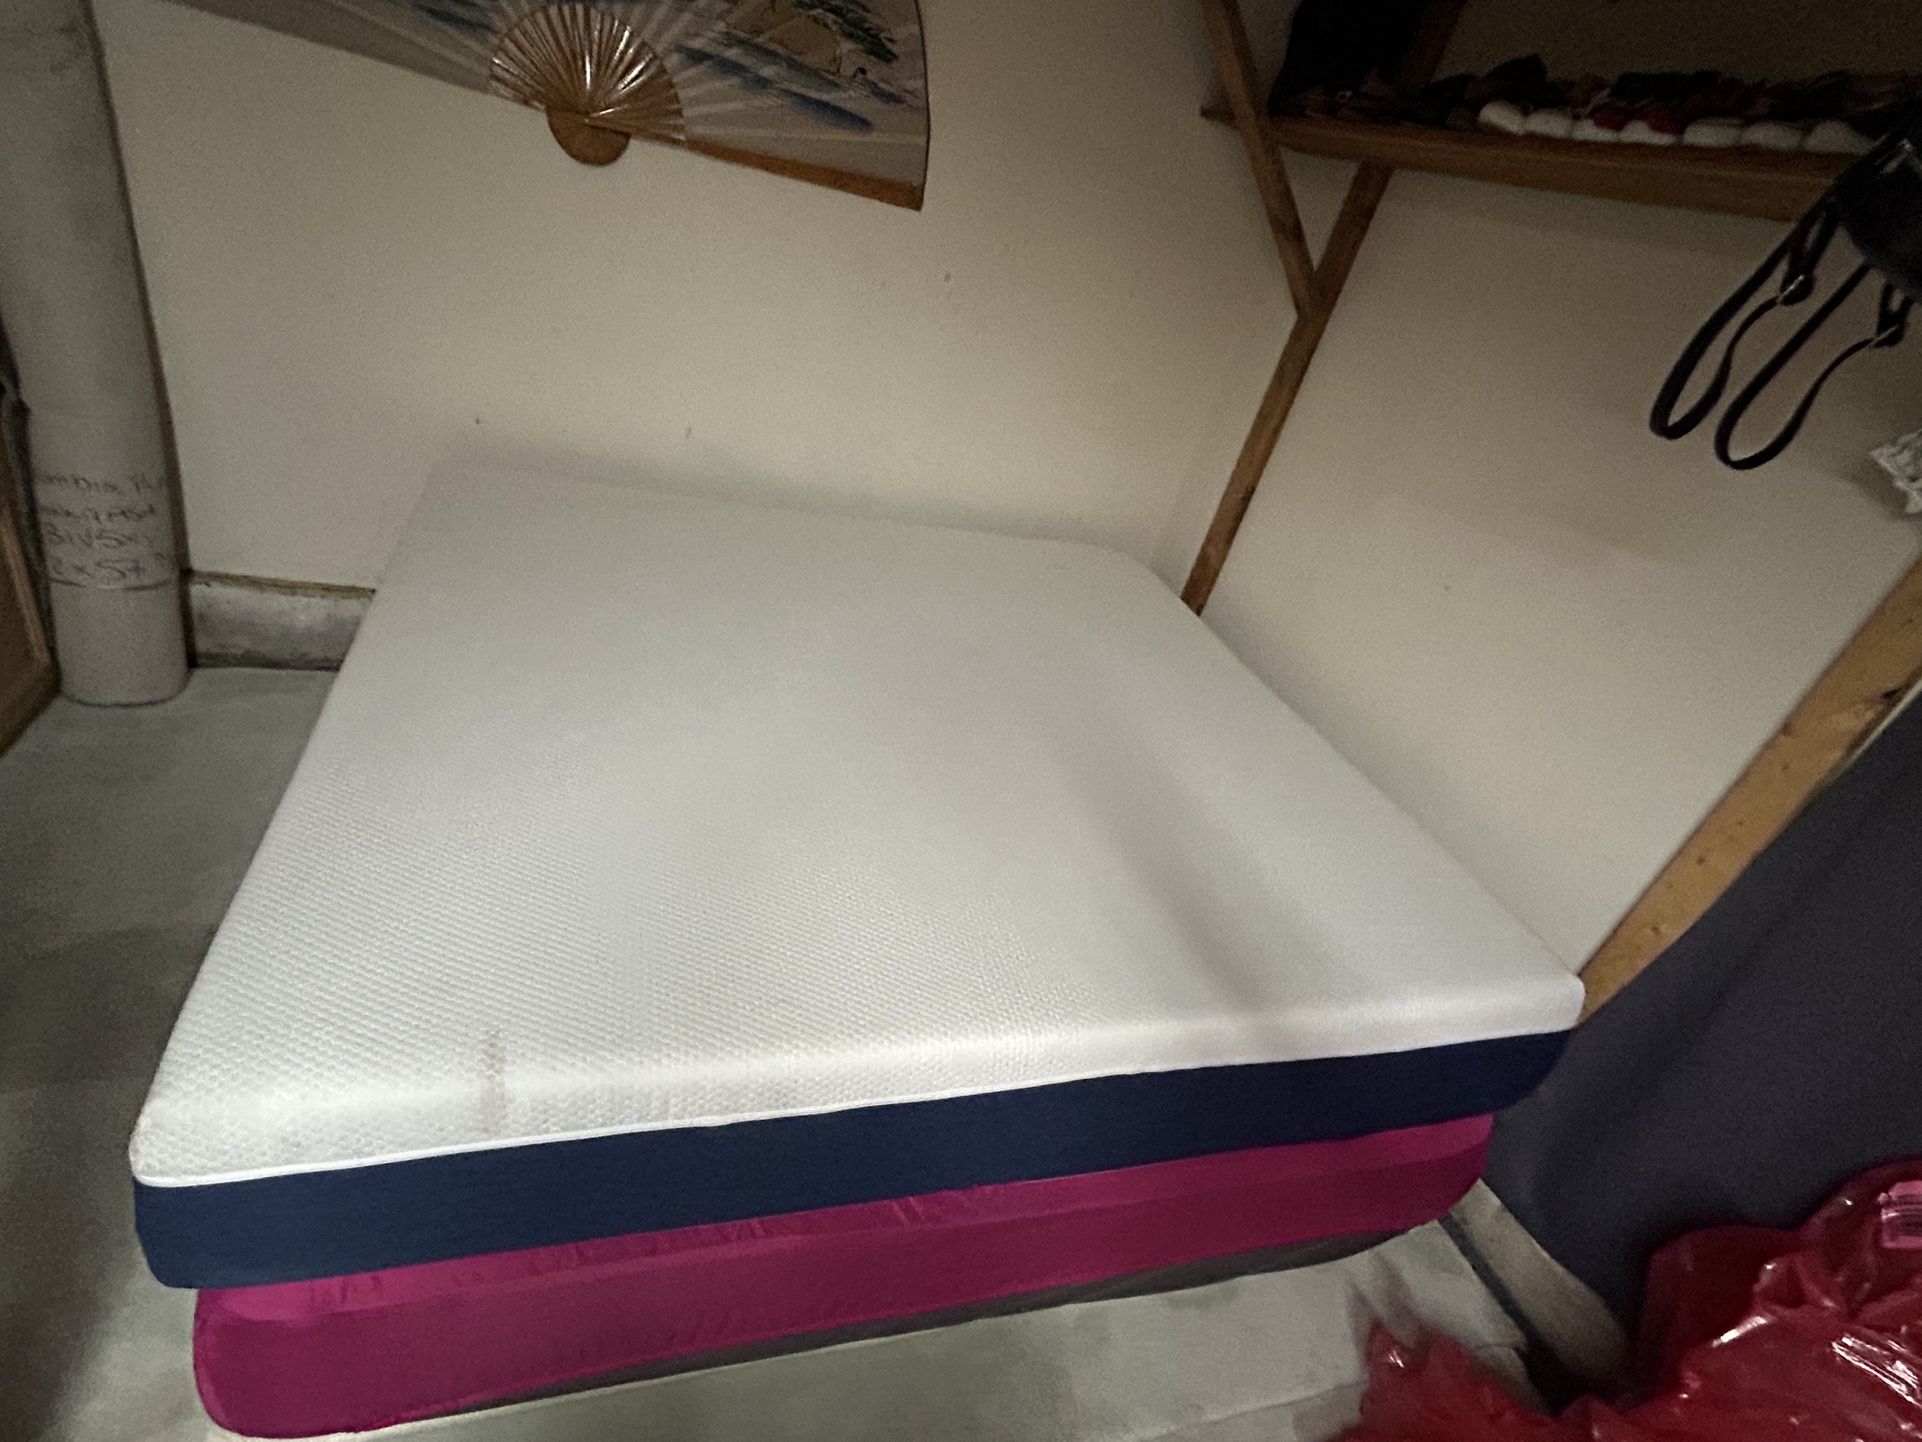 King Size Memory Foam Mattress In Very Good Condition.